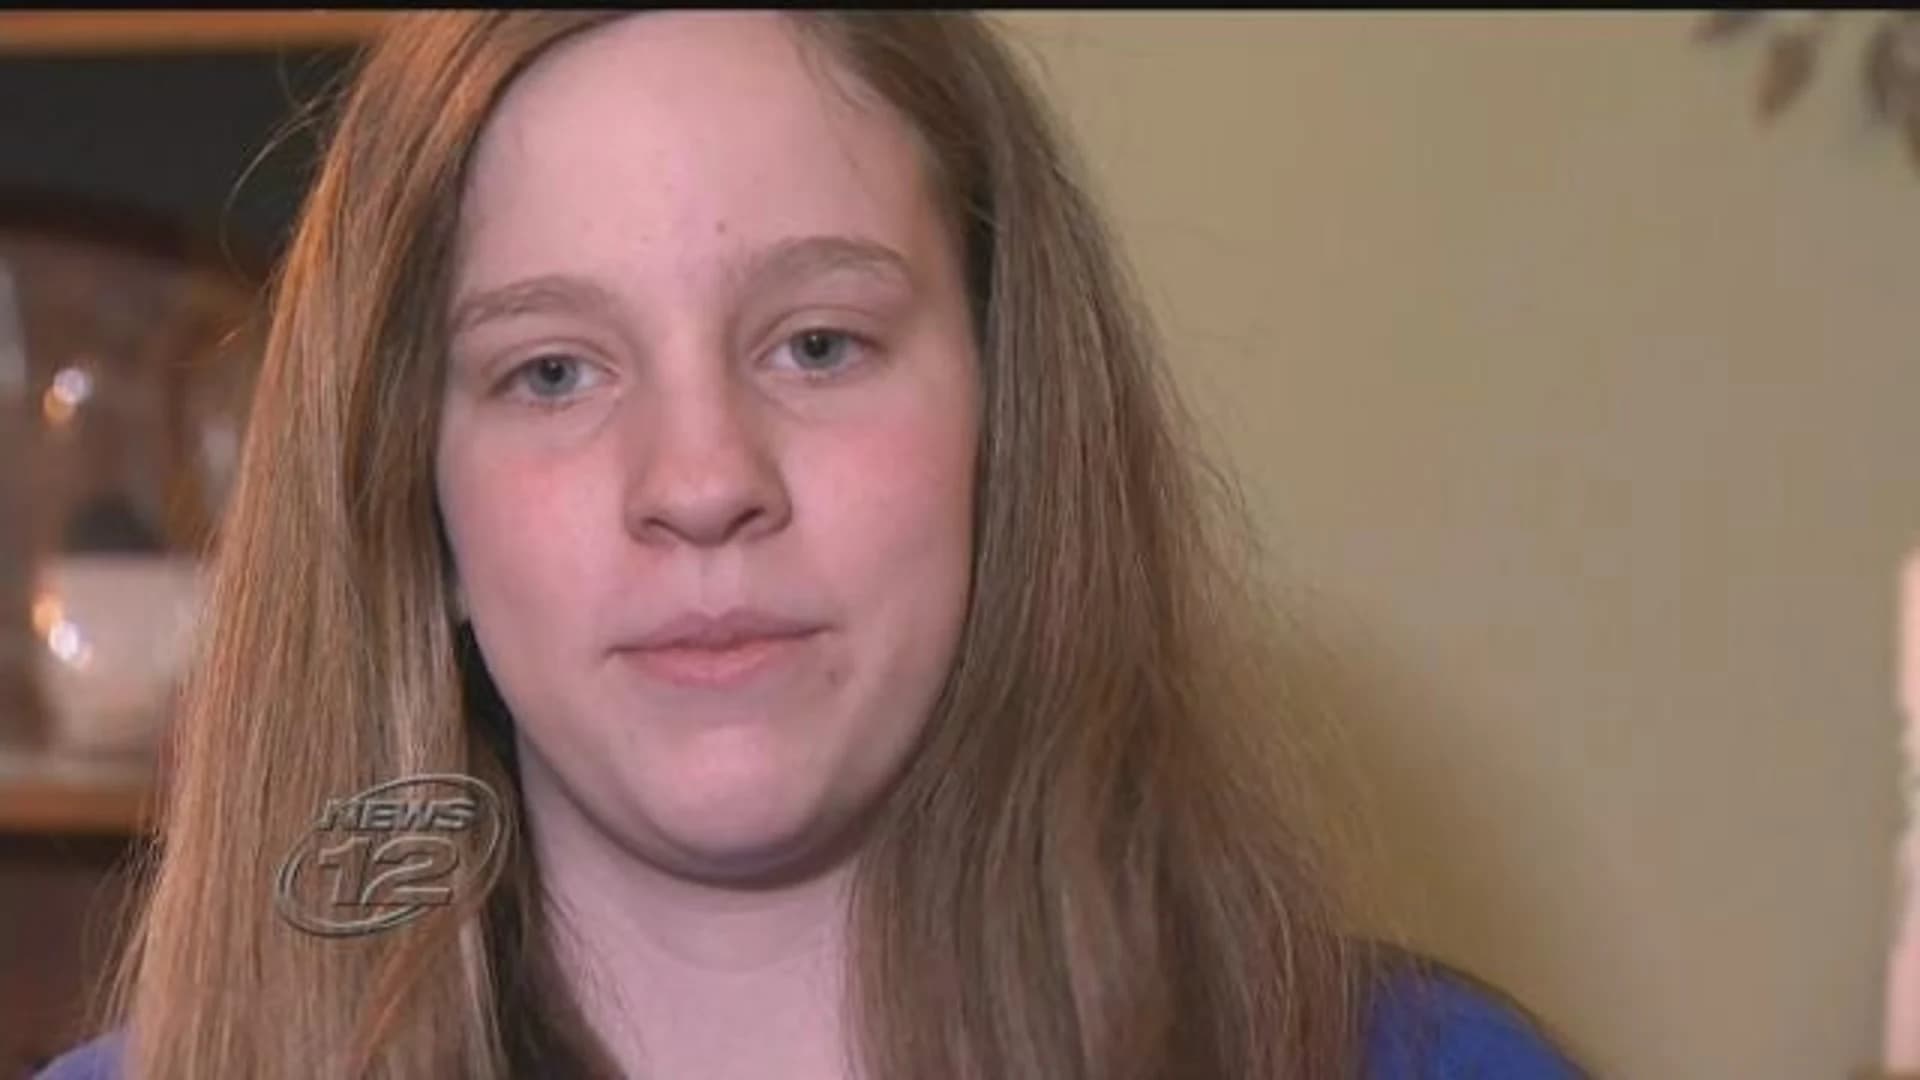 Teen hailed as hero for helping distressed man in Croton River